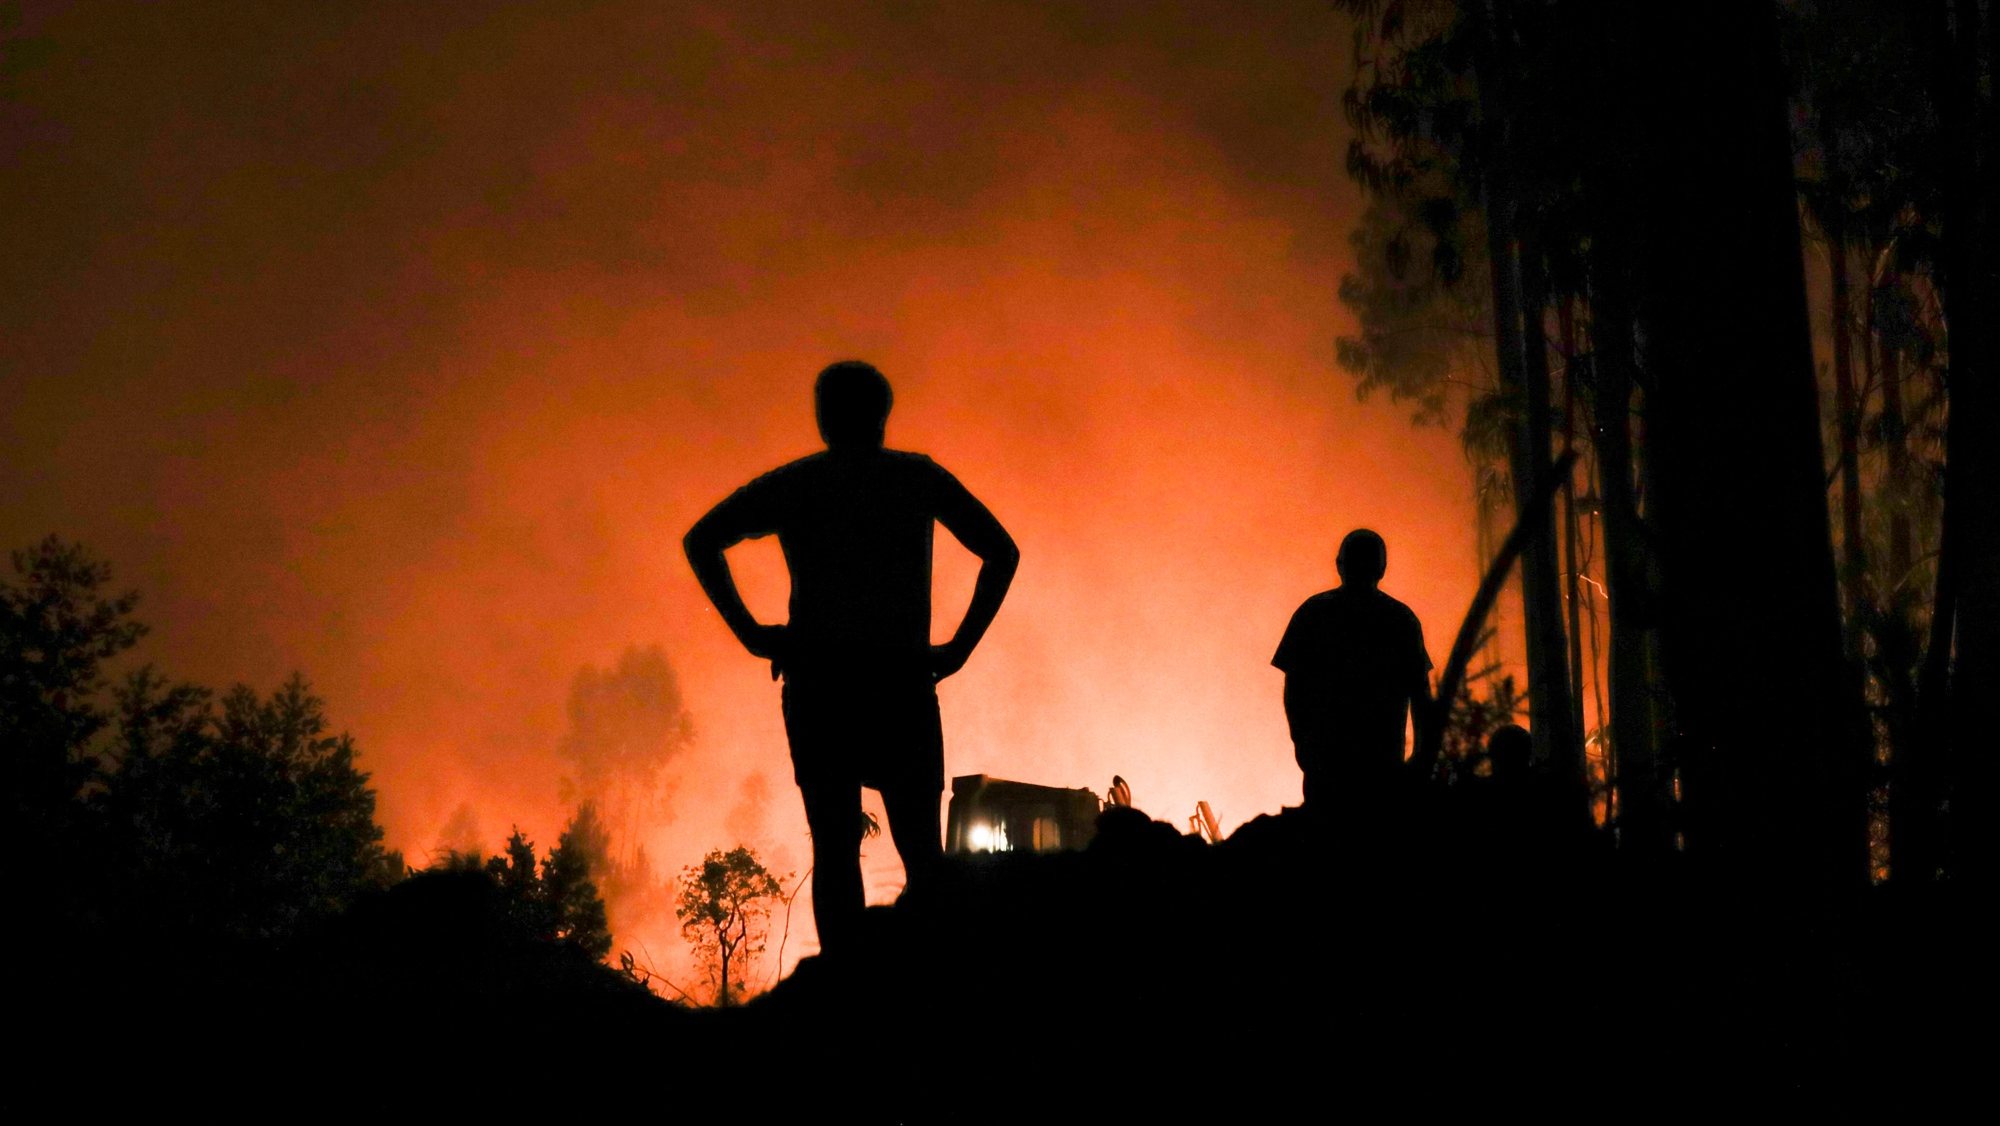 Inhabitants watch the forest fire in the village of Urqueira, Ourem, Portugal, 19 August 2022. At least 50 people were taken out of their homes today, as a precaution, due to the fire that has been raging since 2:40 pm in the municipality of Ourem, district of Santarem. PAULO CUNHA/LUSA